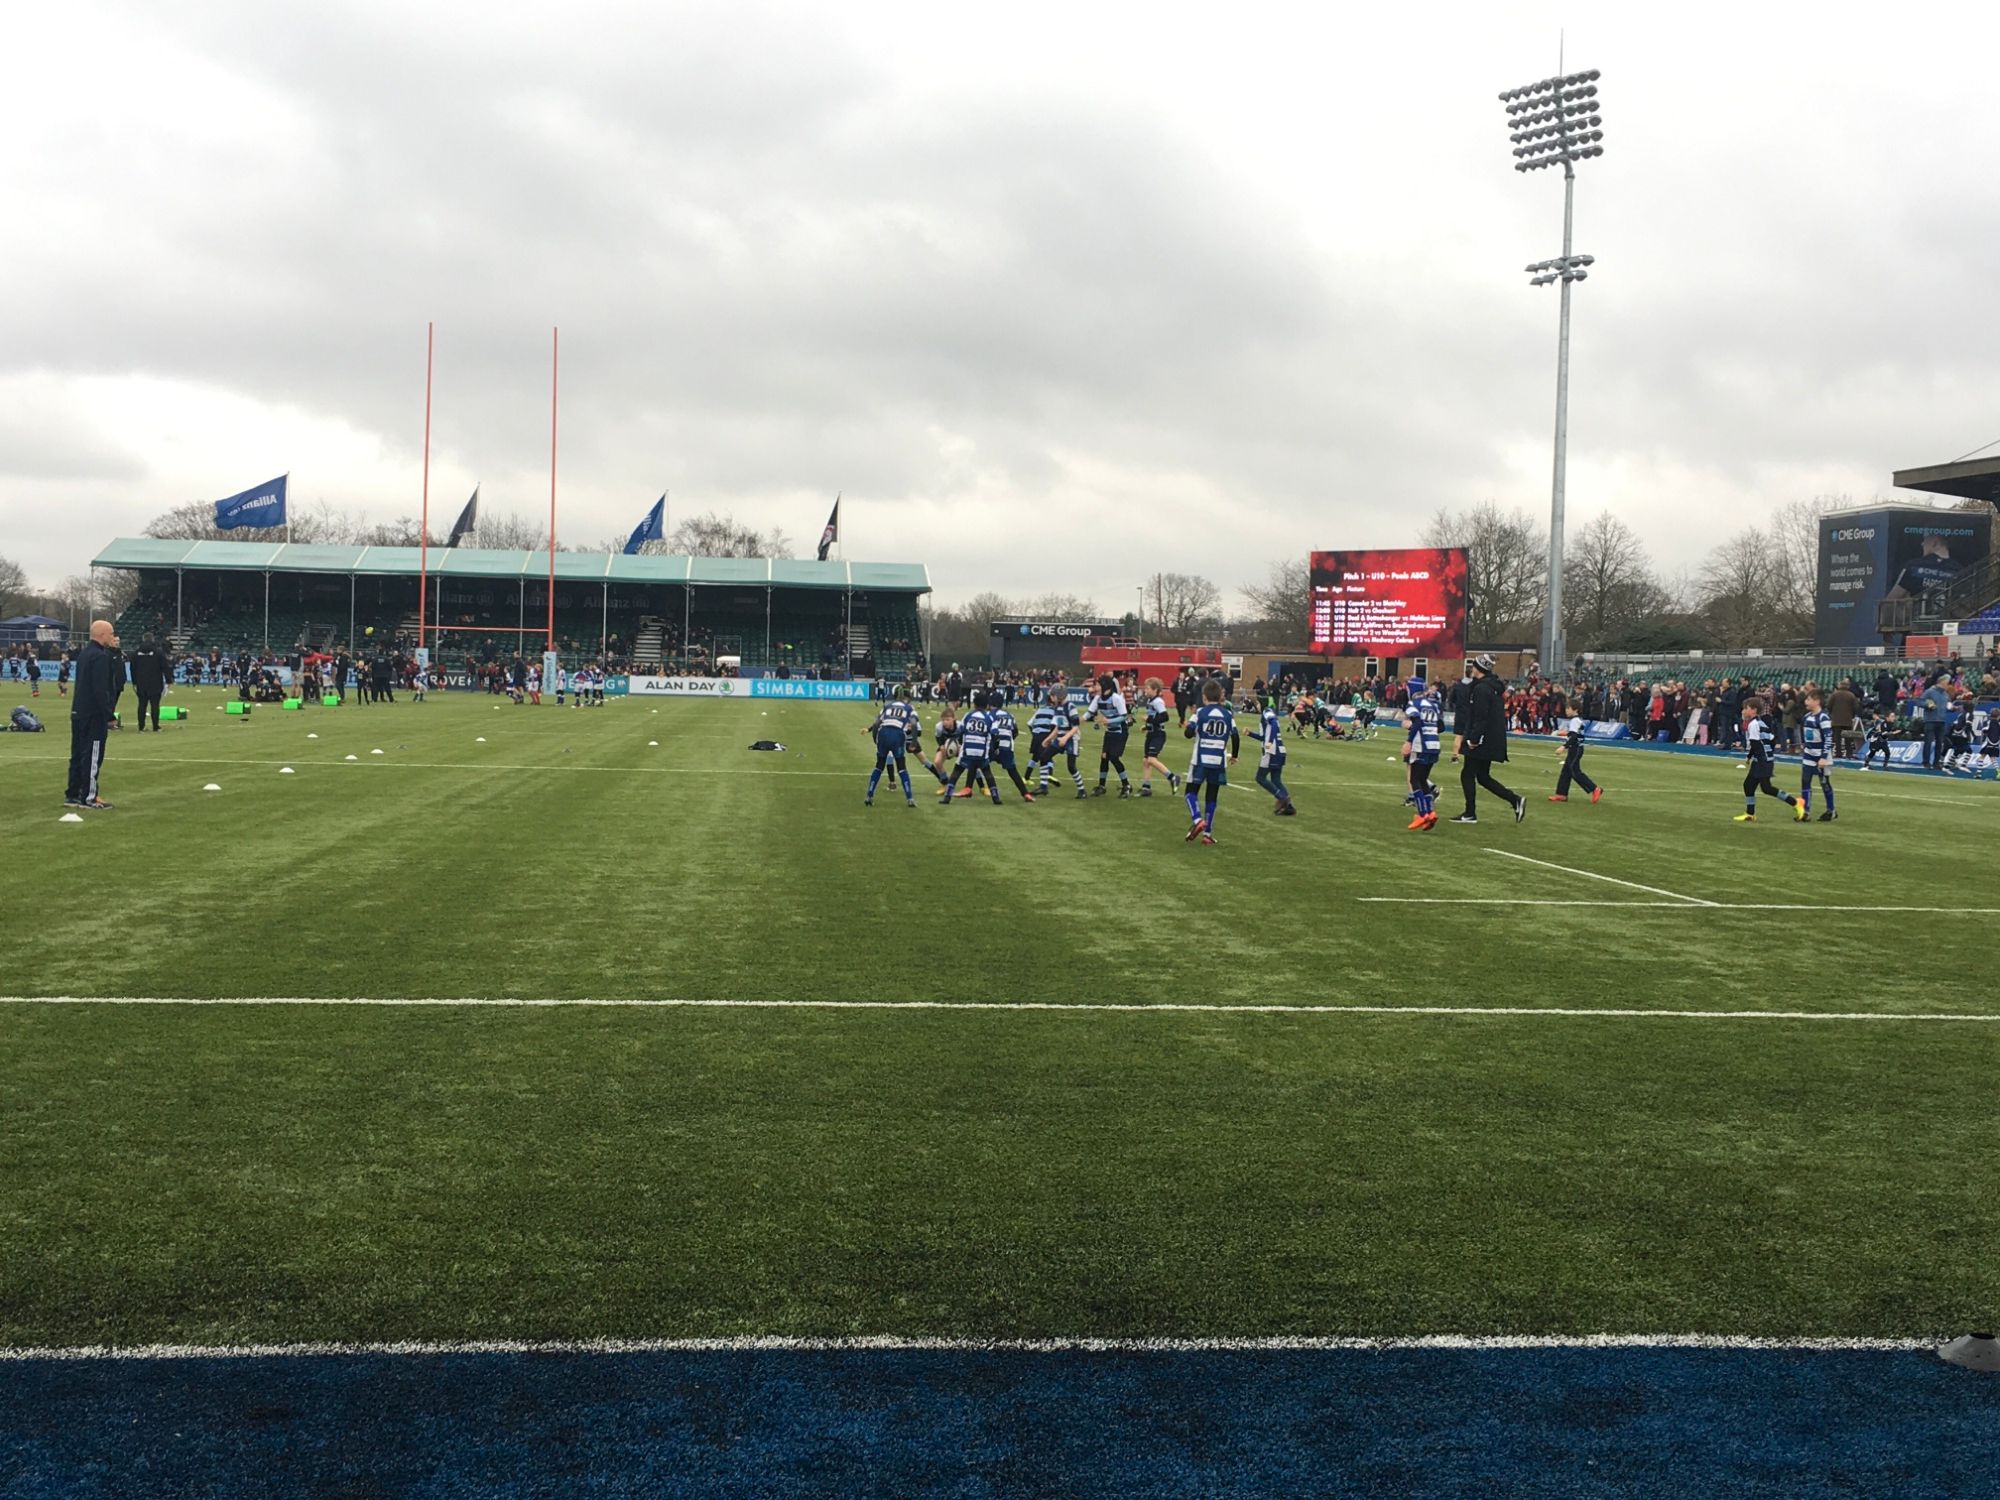 Dame B's playing at Allianz Park